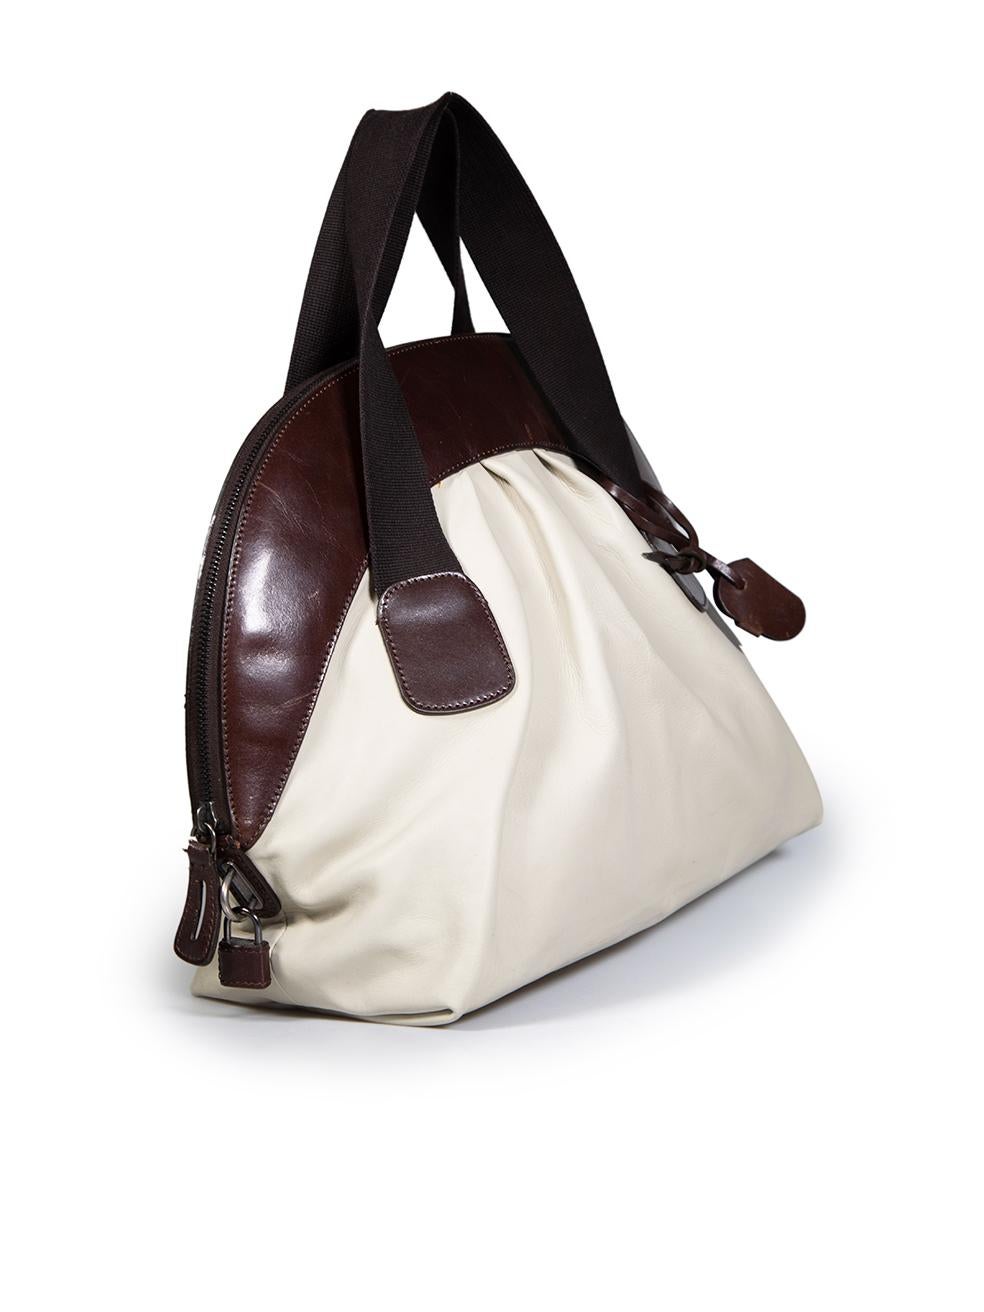 CONDITION is Good. General wear to bag is evident. Moderate signs of wear to the front, back and base, with some scratches to the leather trims on this used Marni designer resale item.
 
 
 
 Details
 
 
 Beige
 
 Leather
 
 Medium handbag
 
 Brown